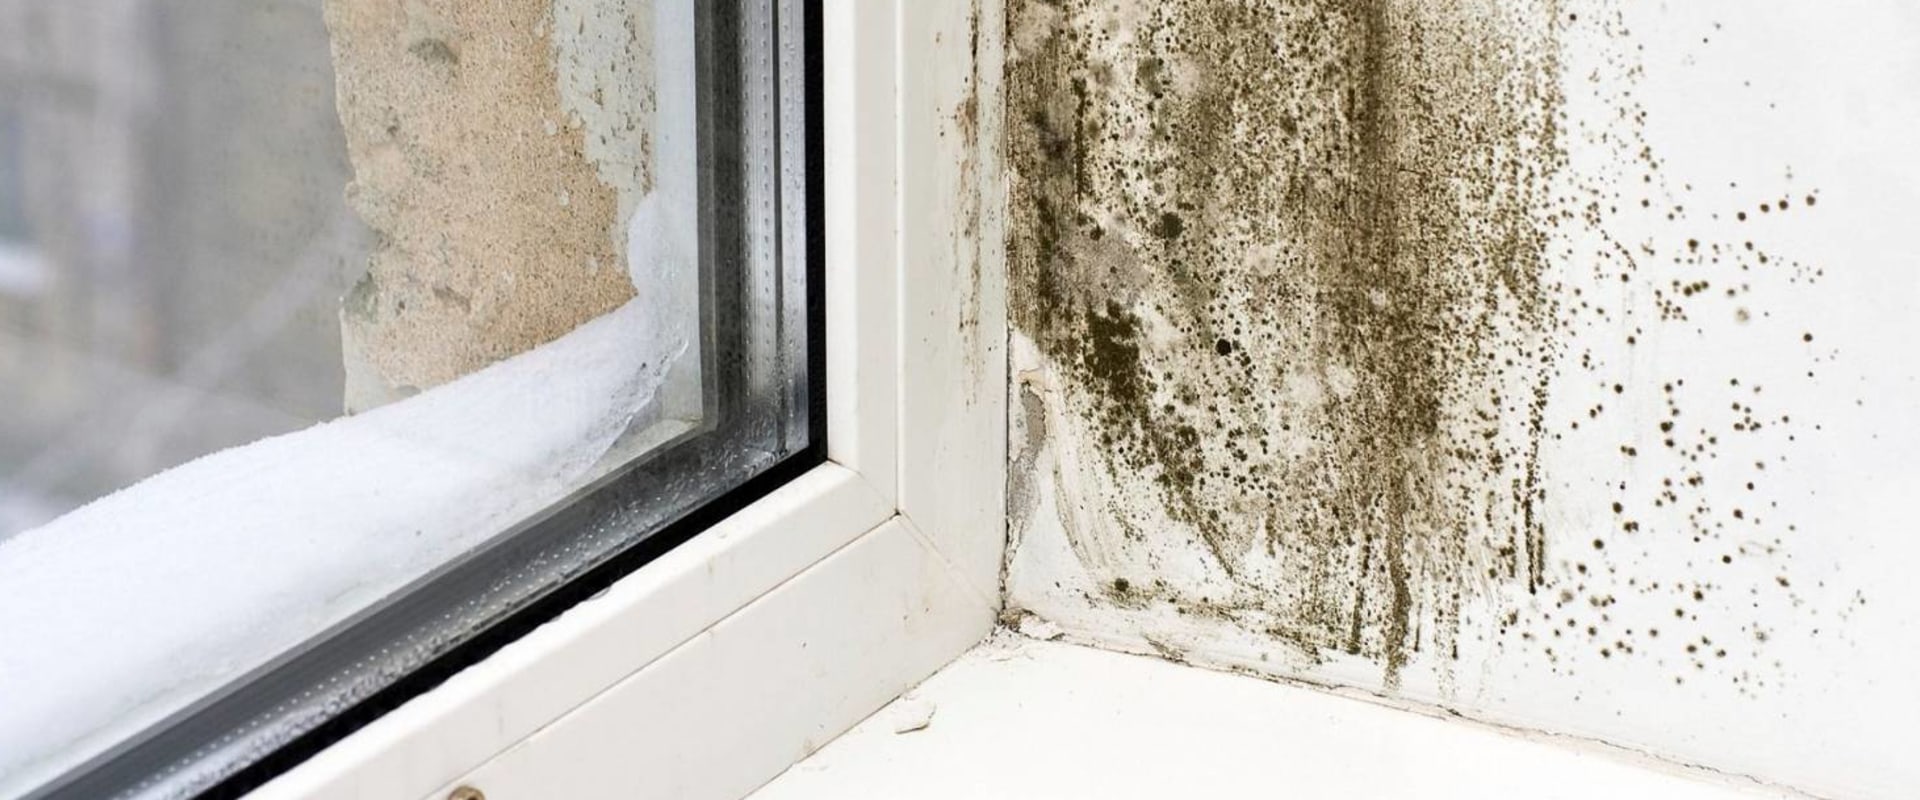 What Are the Dangers of Sleeping in a House with Mold?